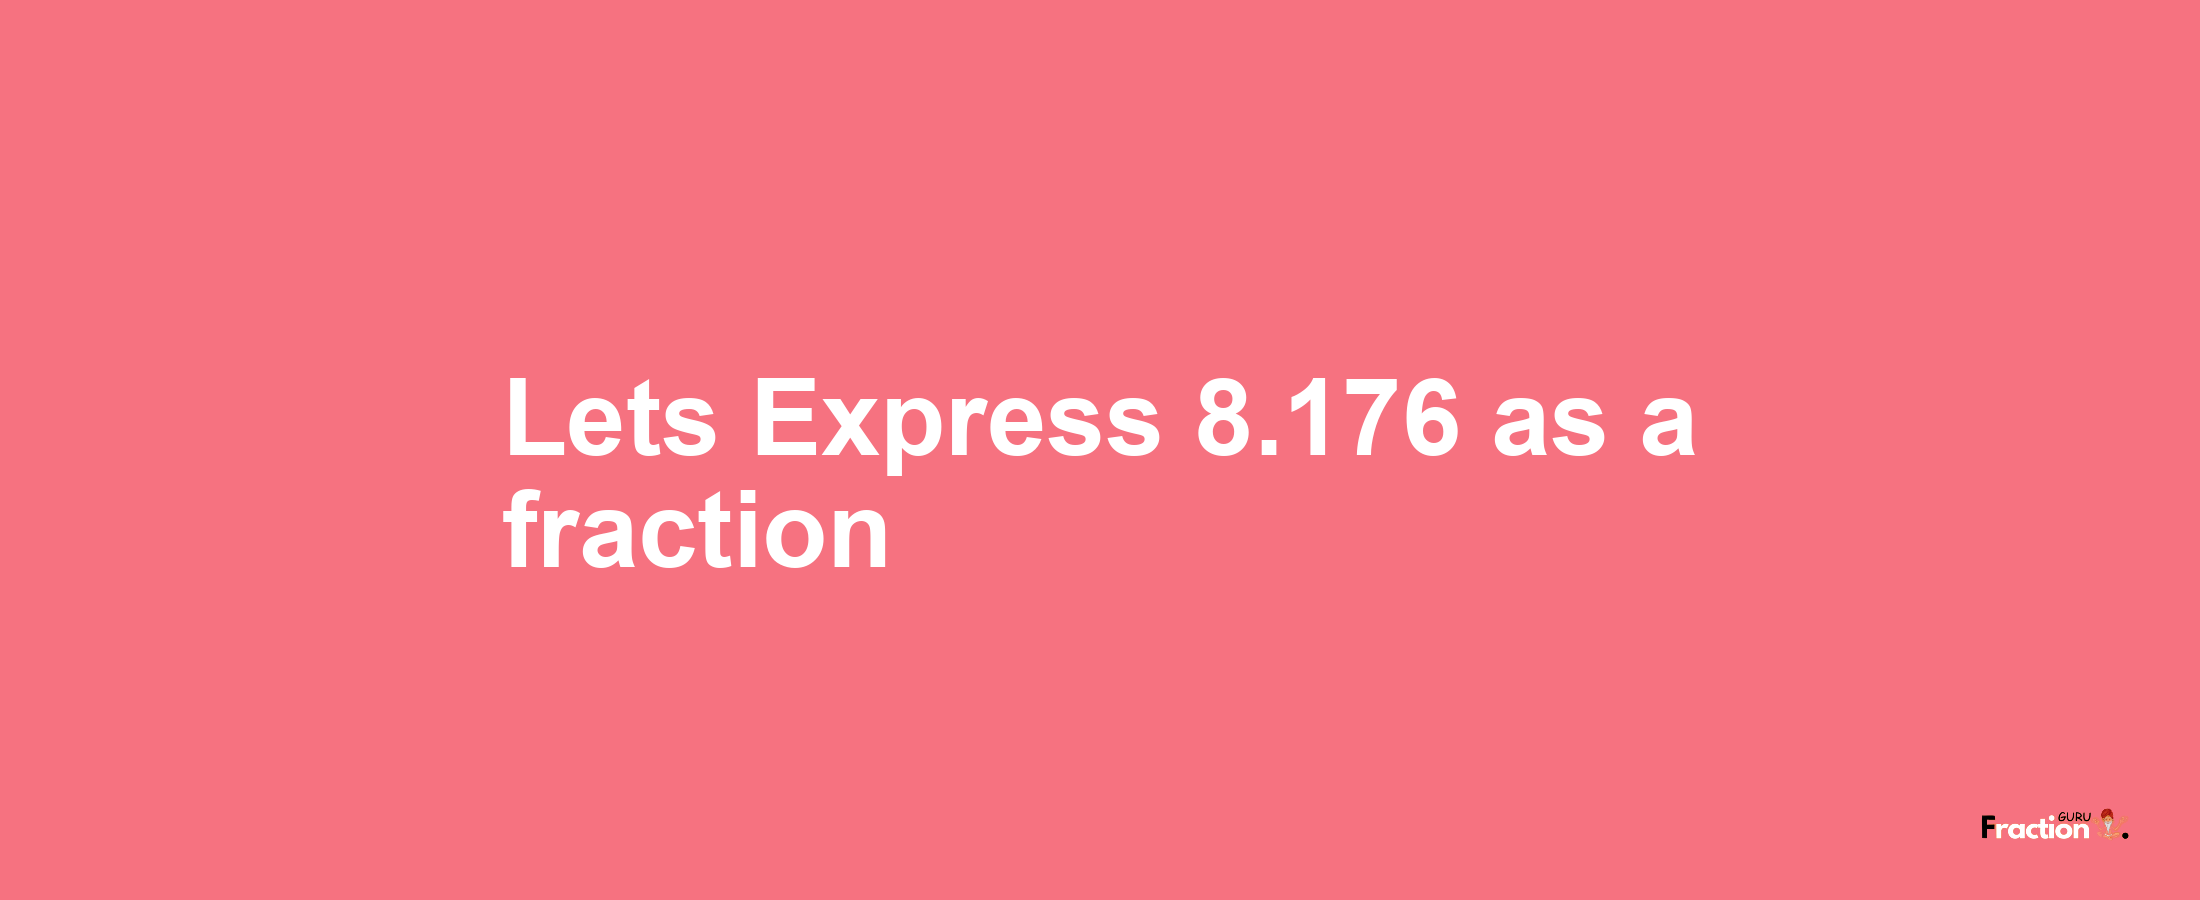 Lets Express 8.176 as afraction